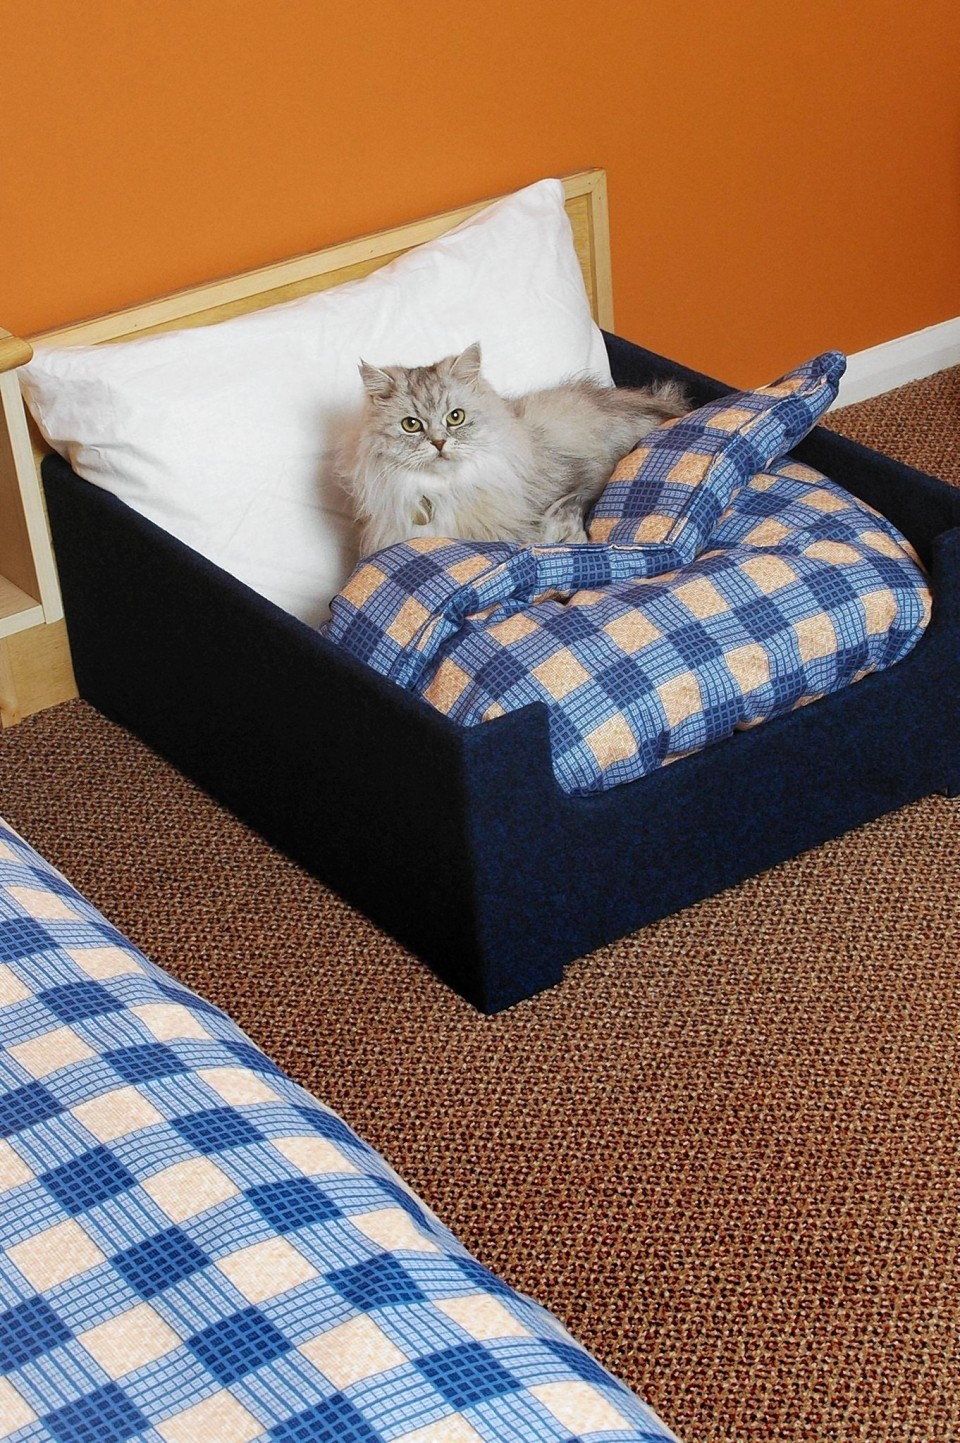 Travelodge introduced beds for pets but one customer was looking for more substantial kitty sleeping conditions